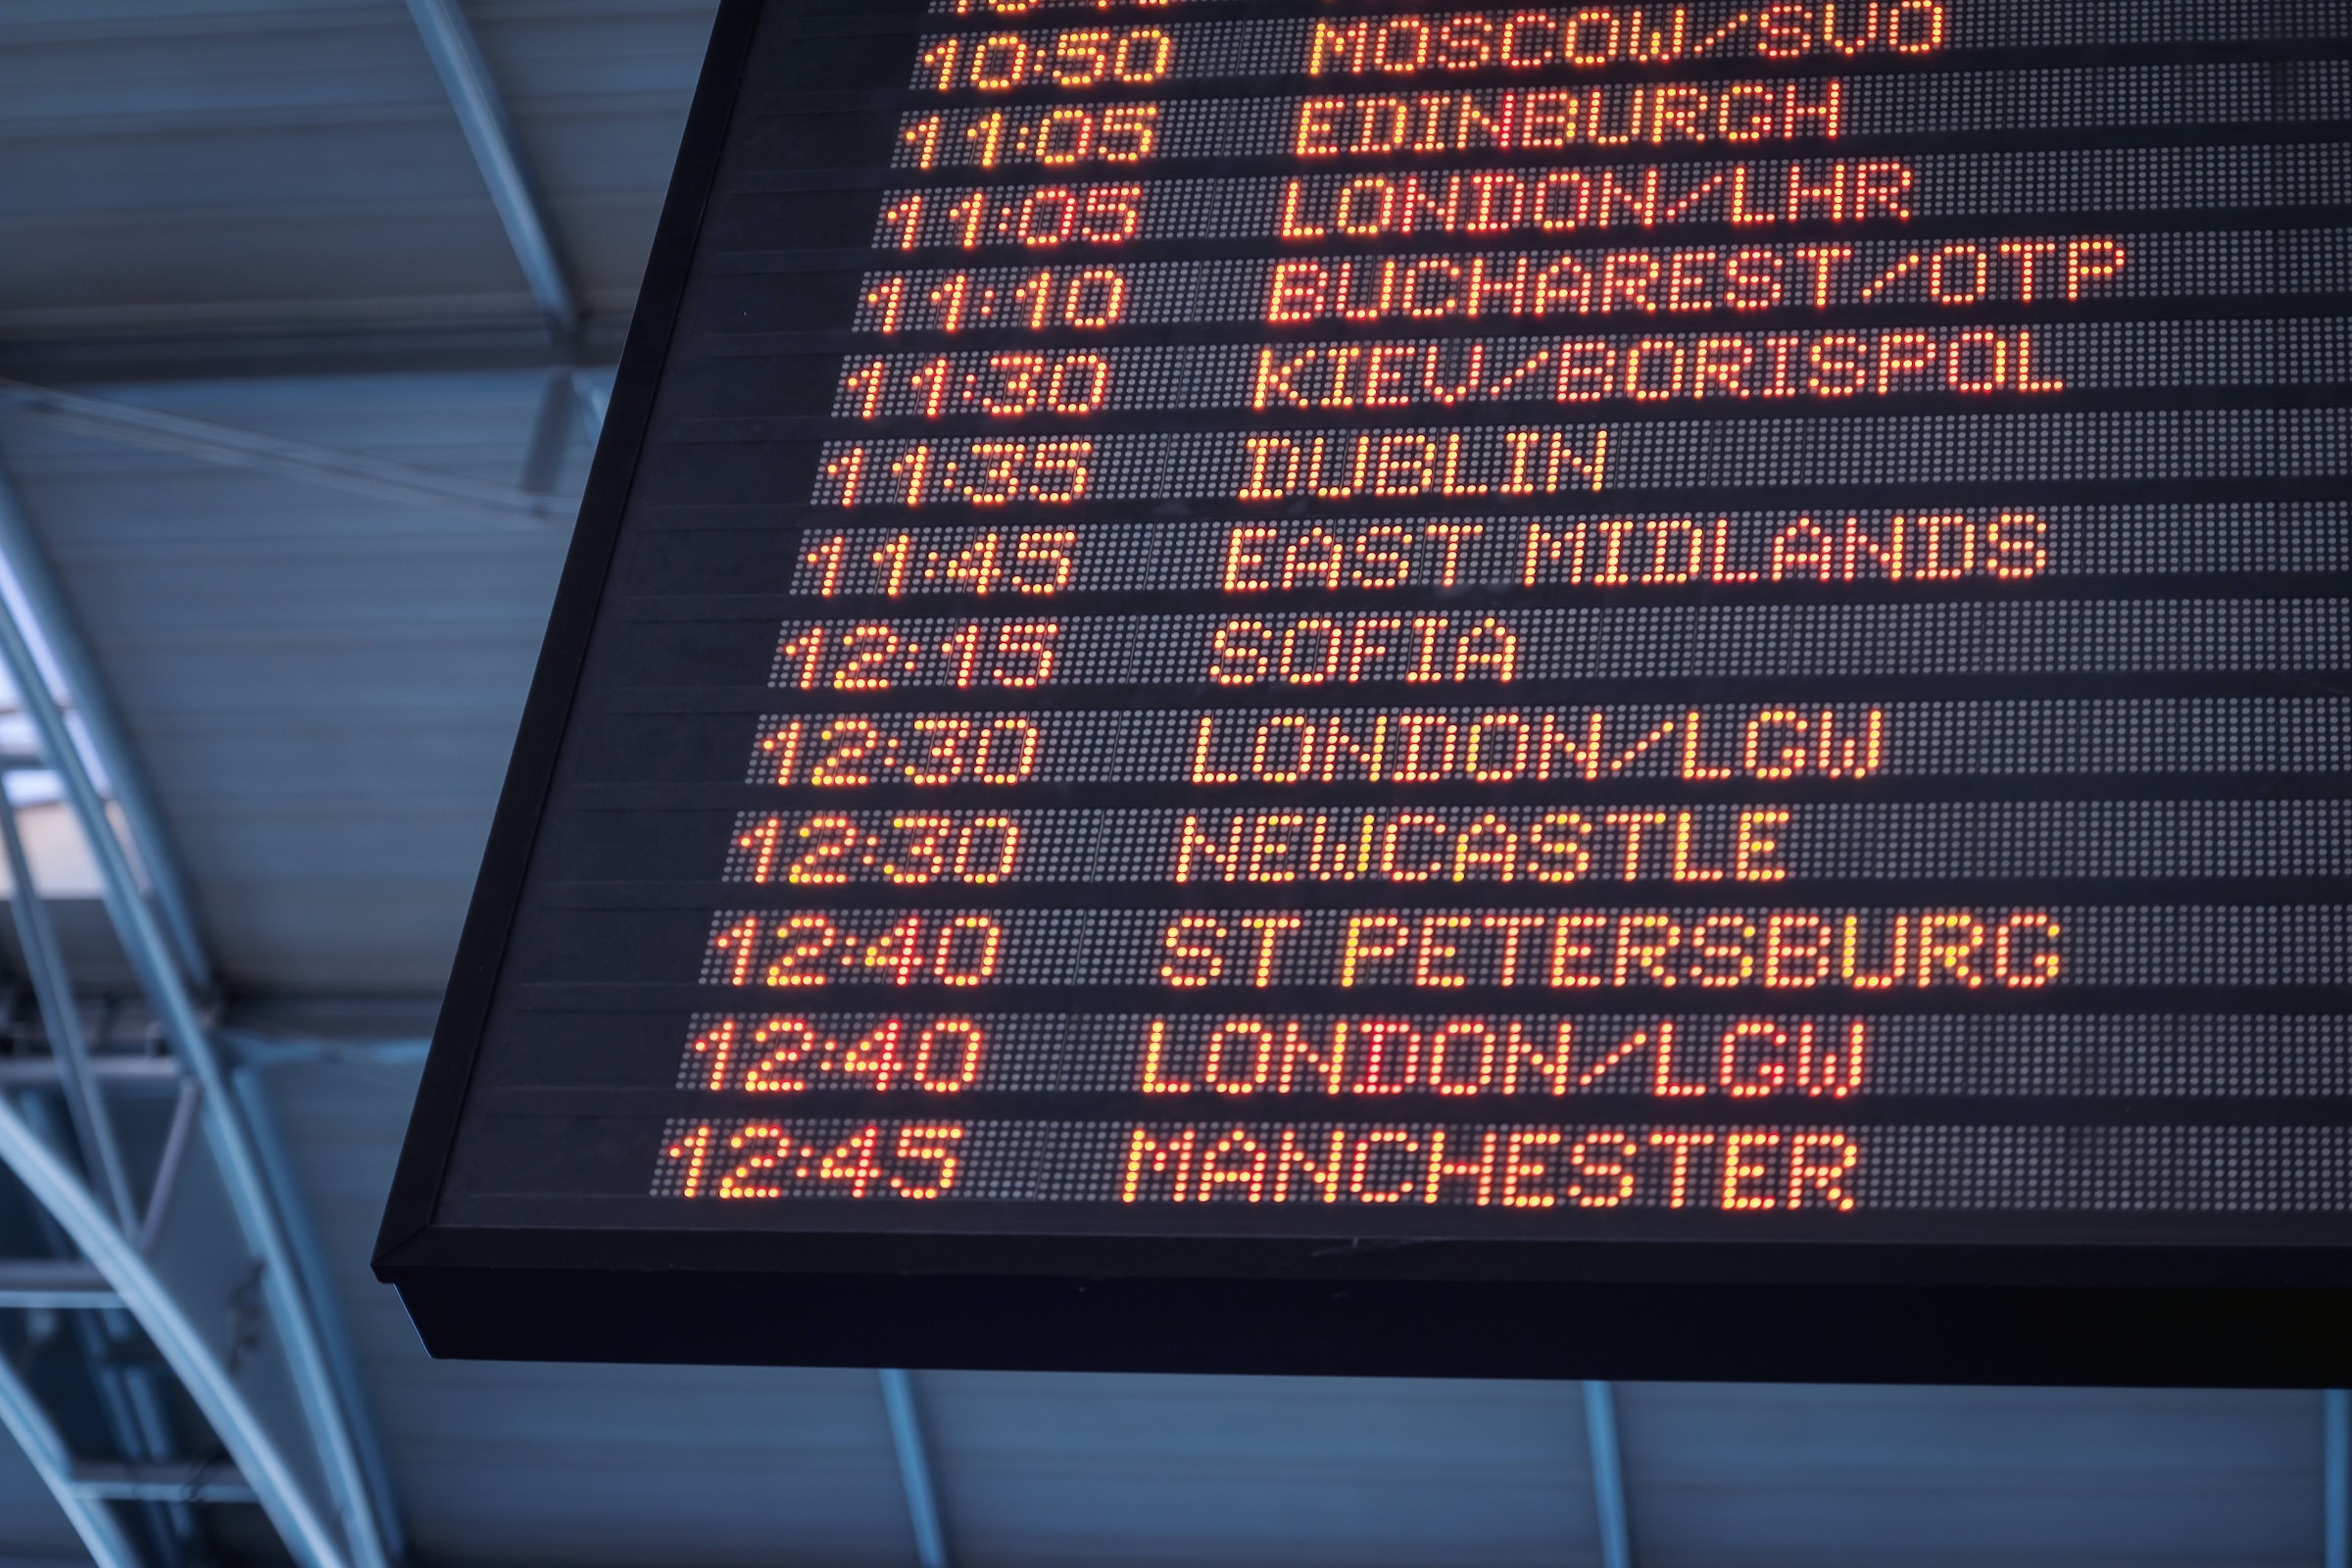 A departure board showing a list of destinations